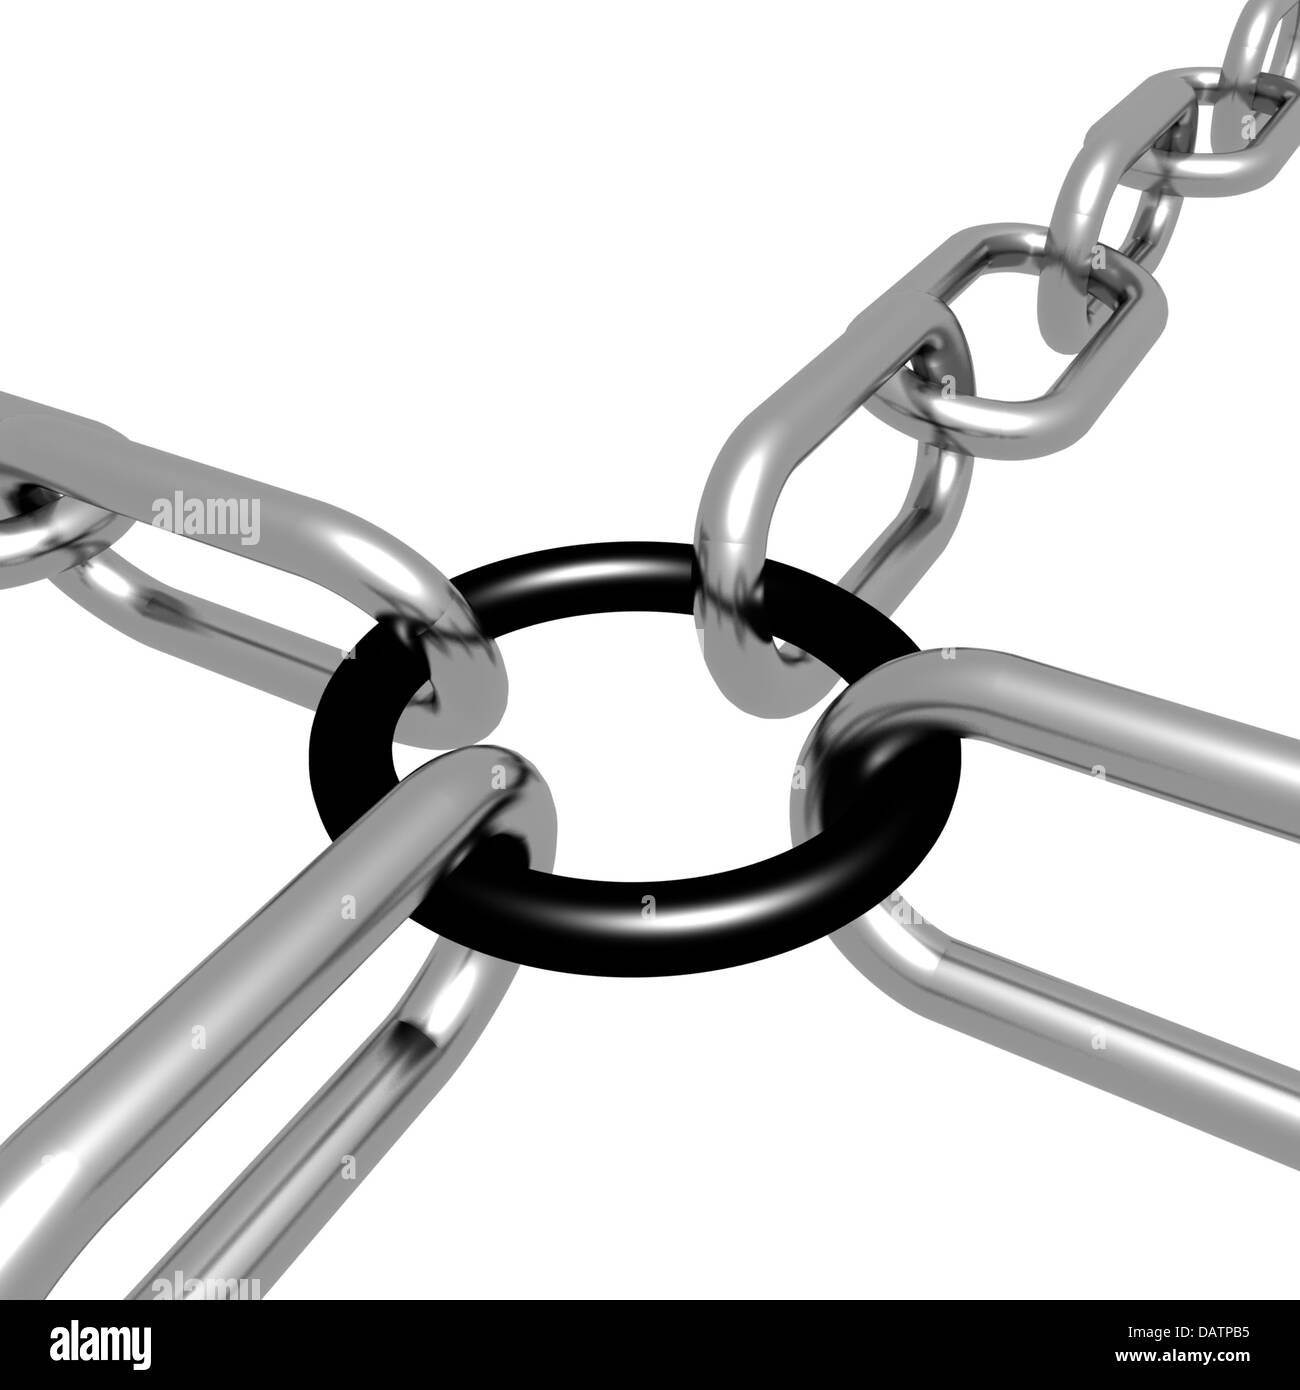 Black Link Chain Shows Strength Security Stock Photo